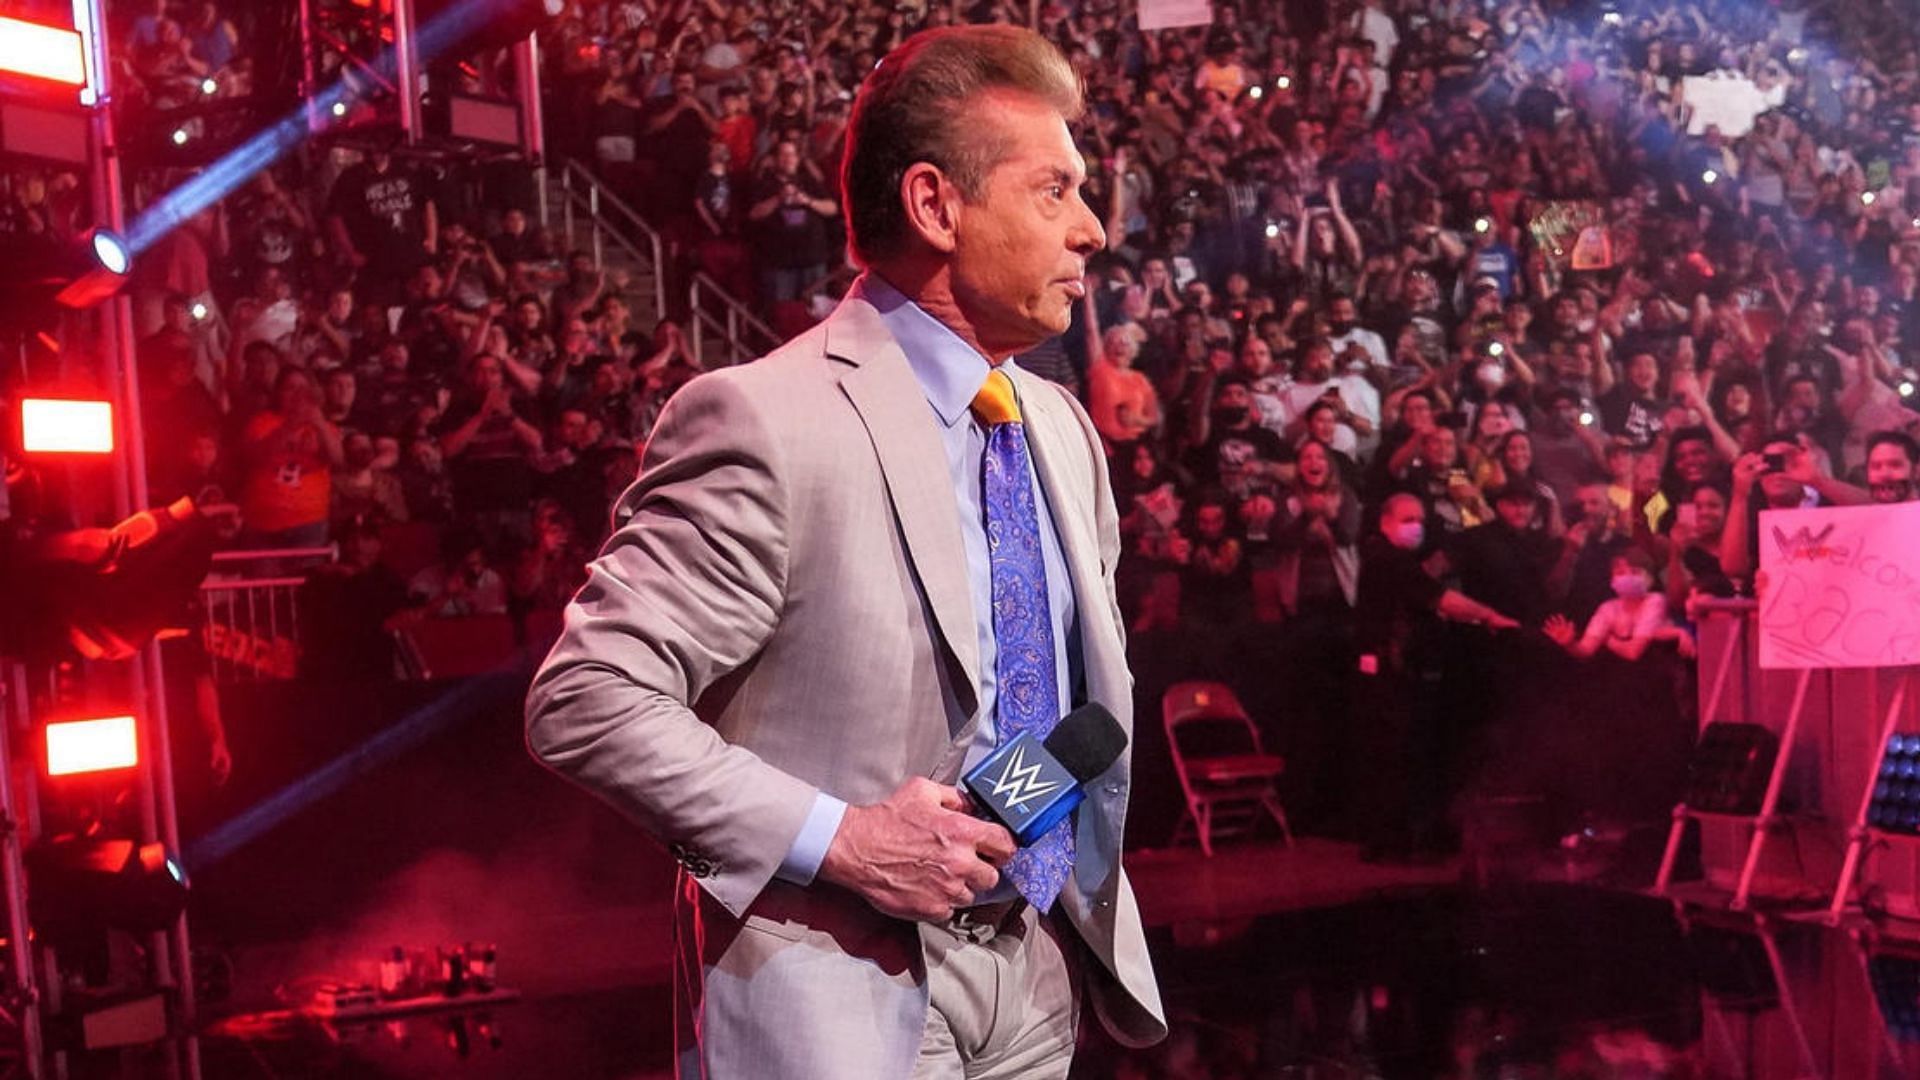 Vince McMahon appearing on WWE television